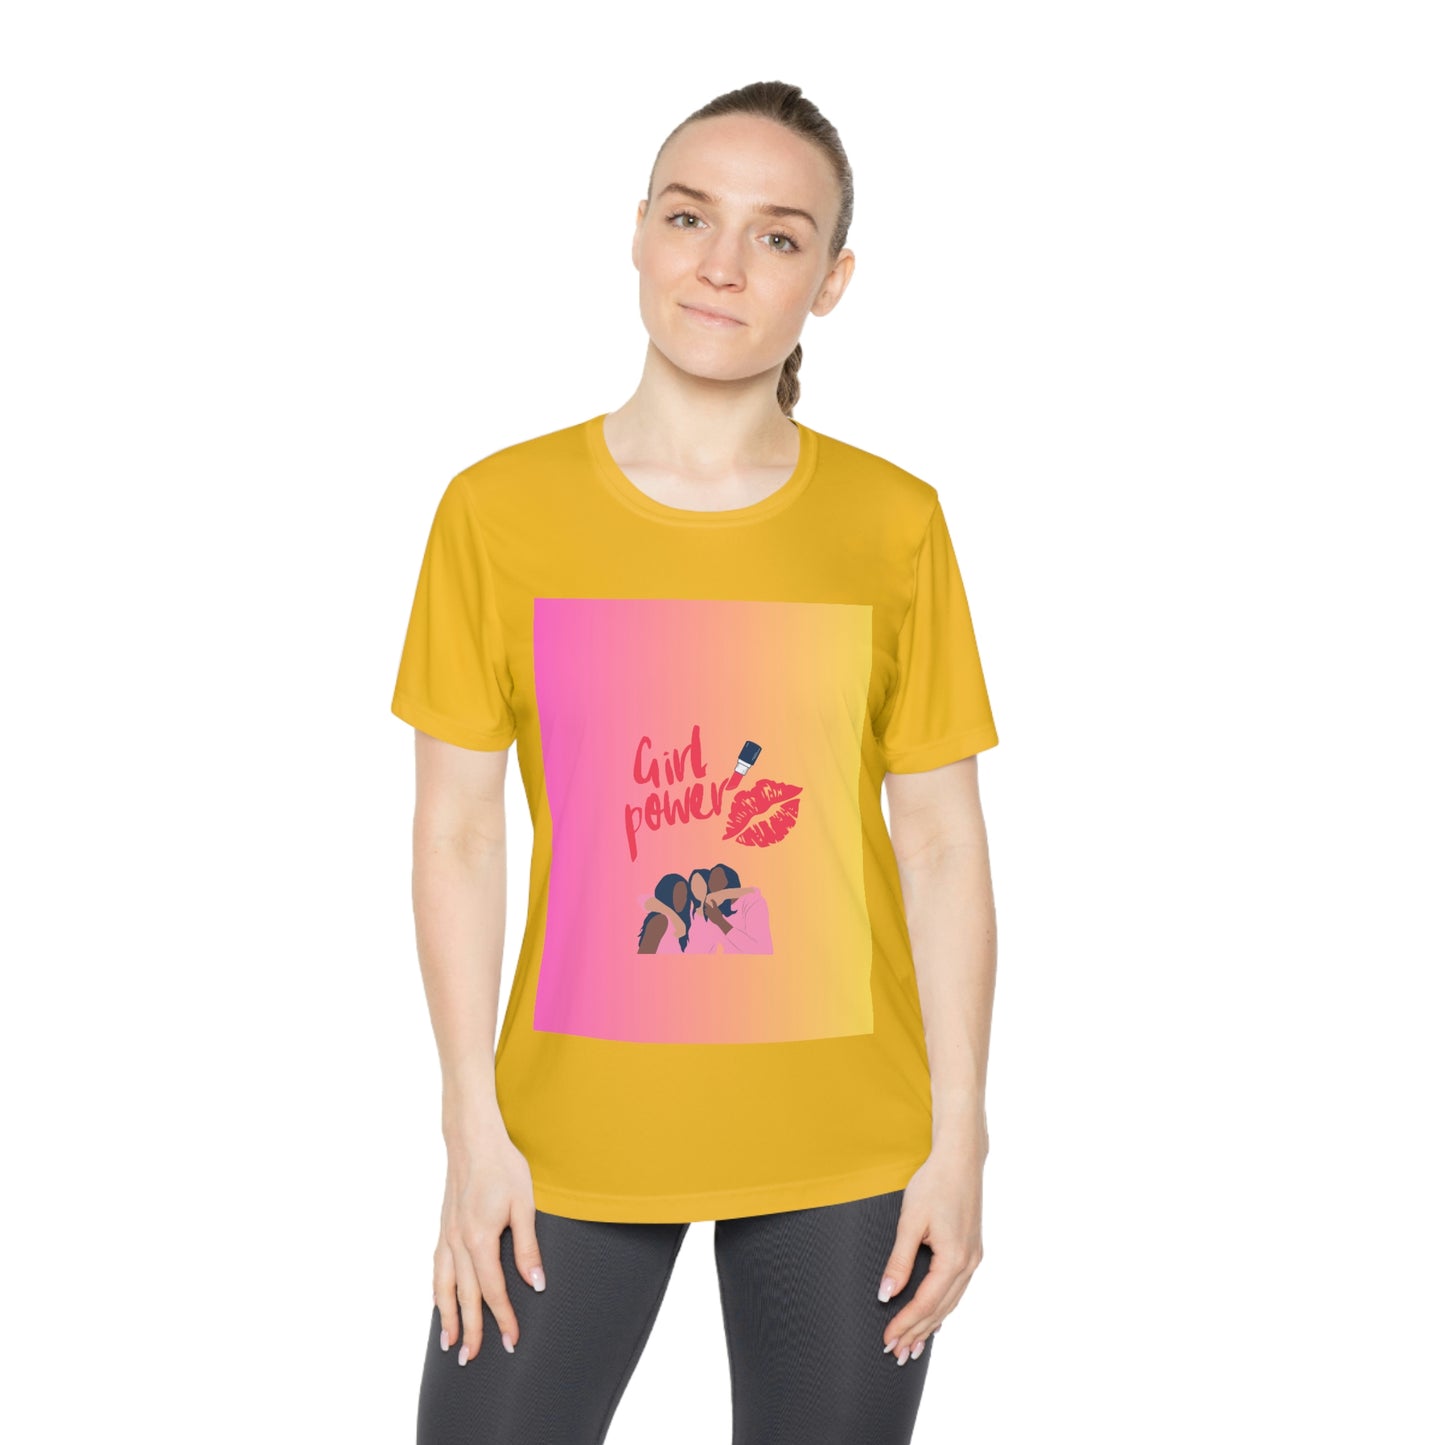 Girl Power Ladies Competitor Tee